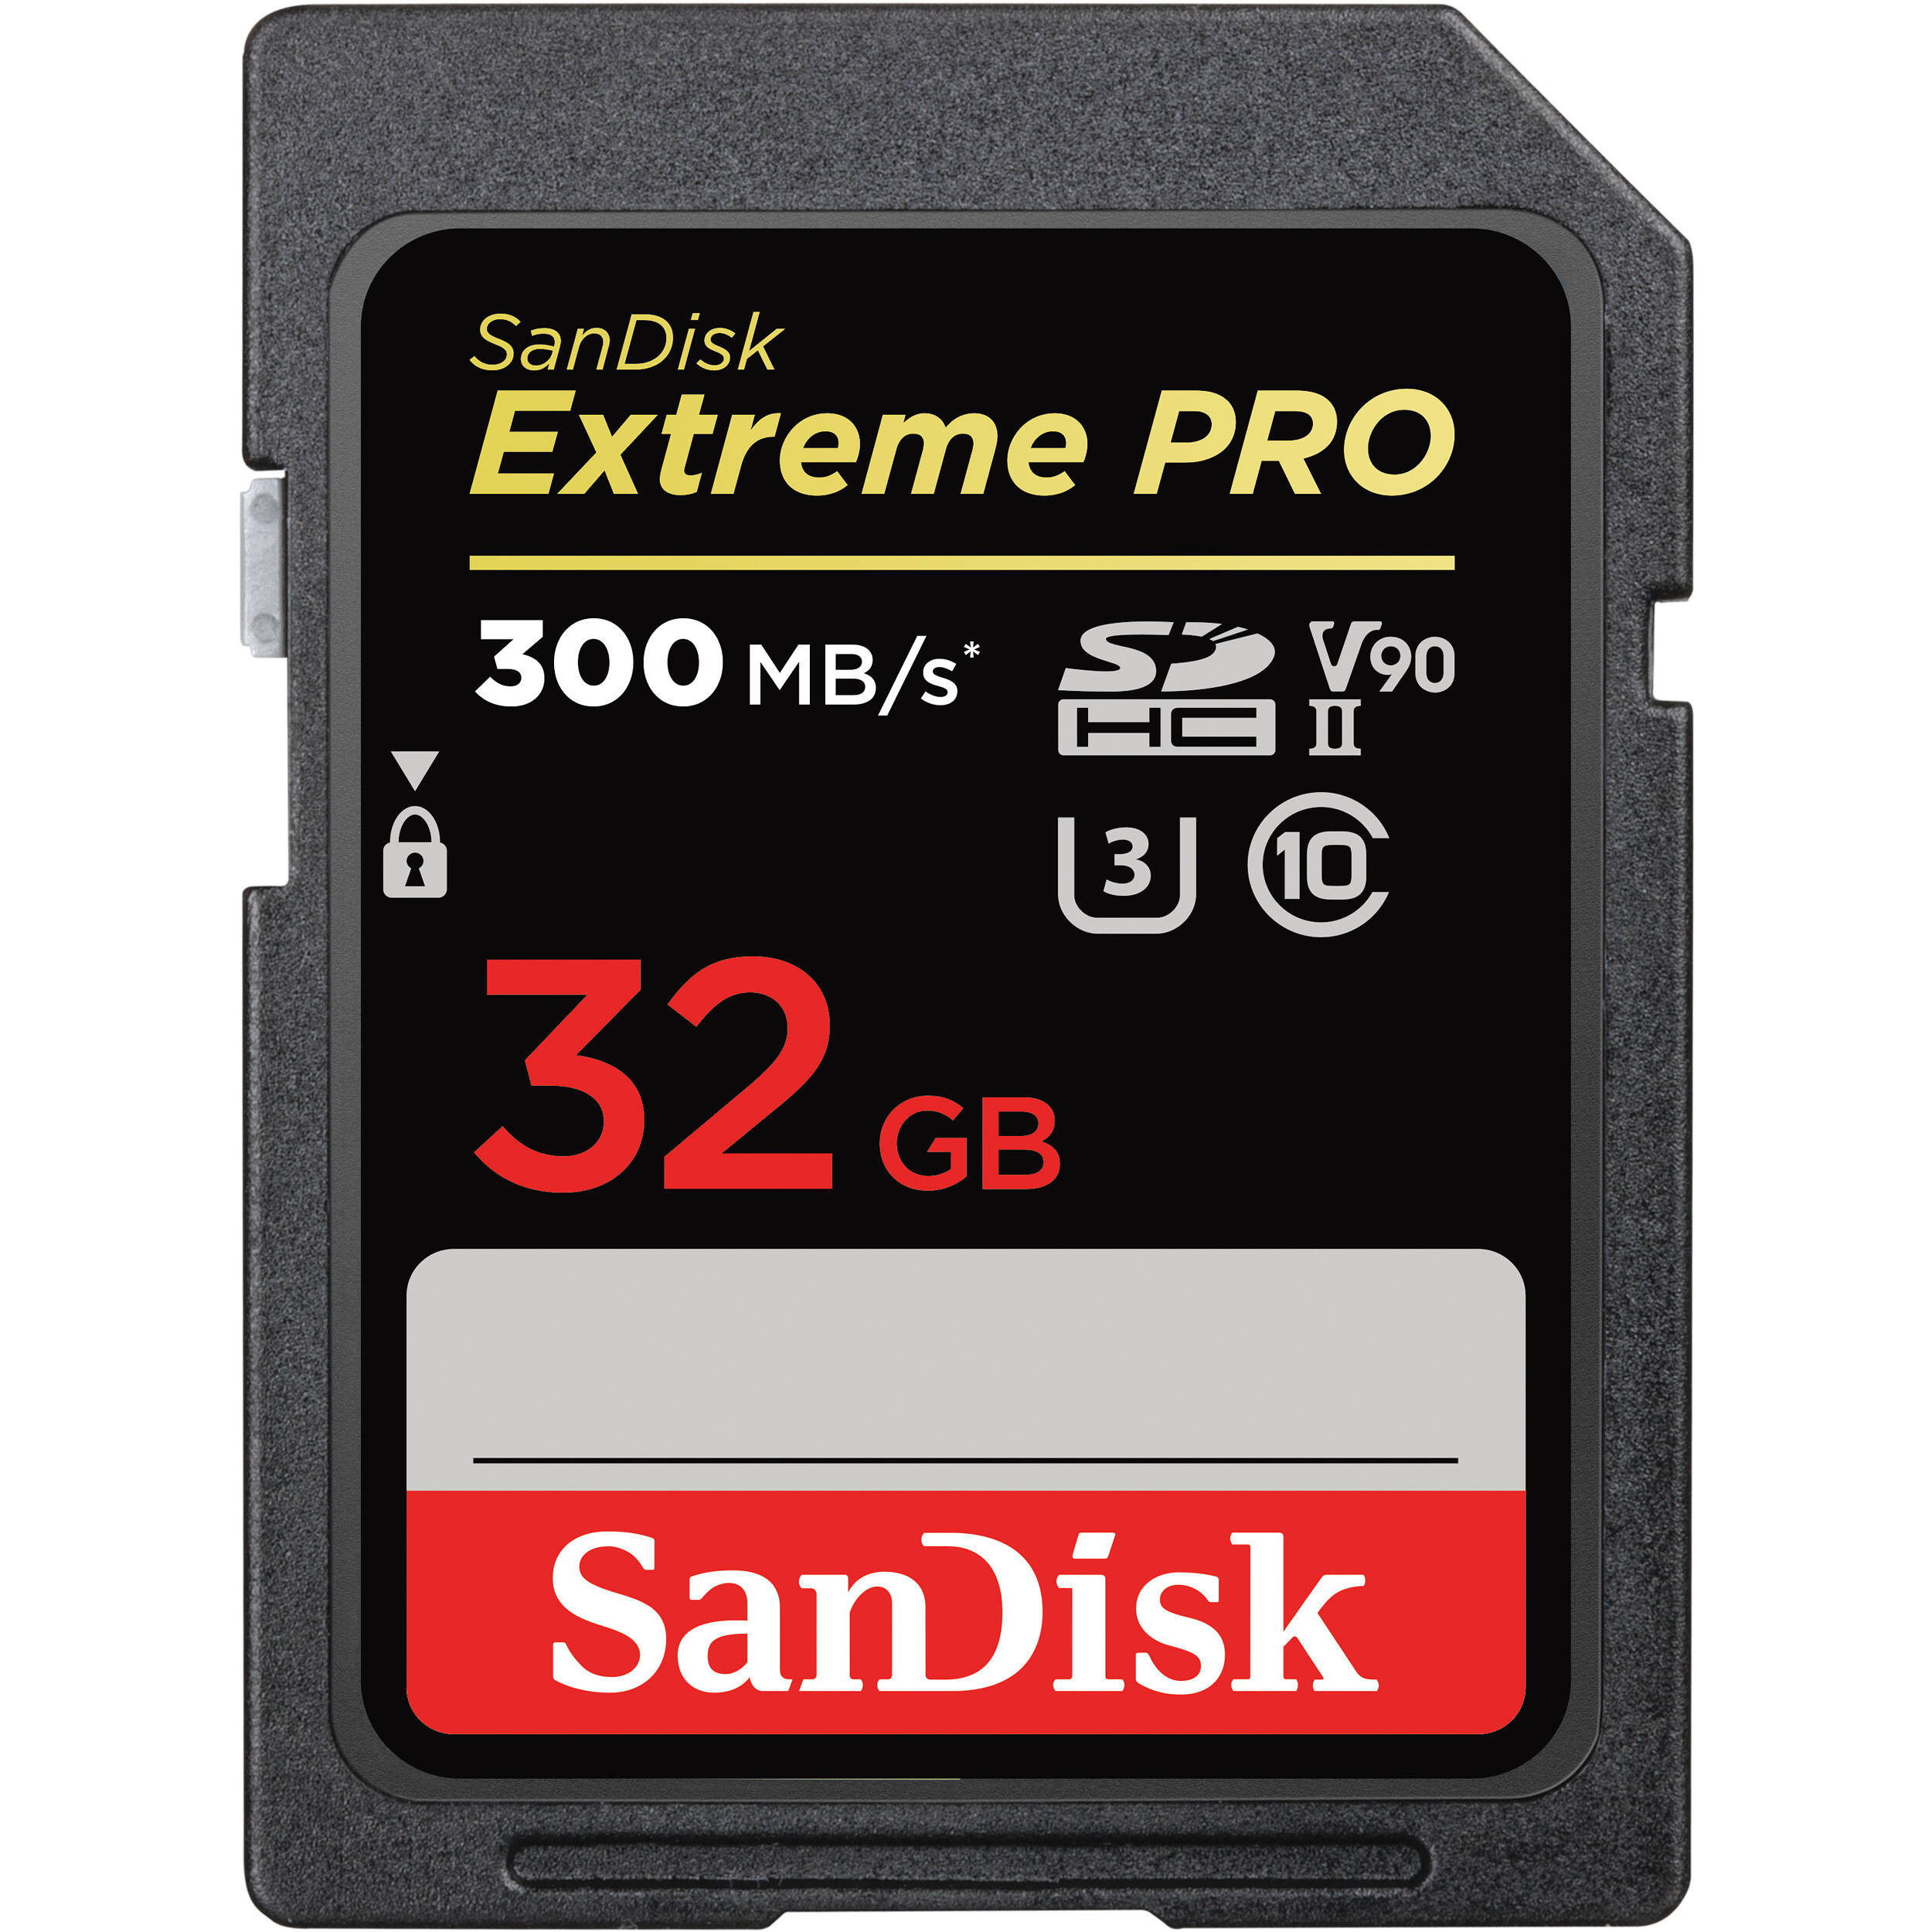 SanDisk 32GB Extreme PRO SDHC UHS-II Memory Card (3-Pack)